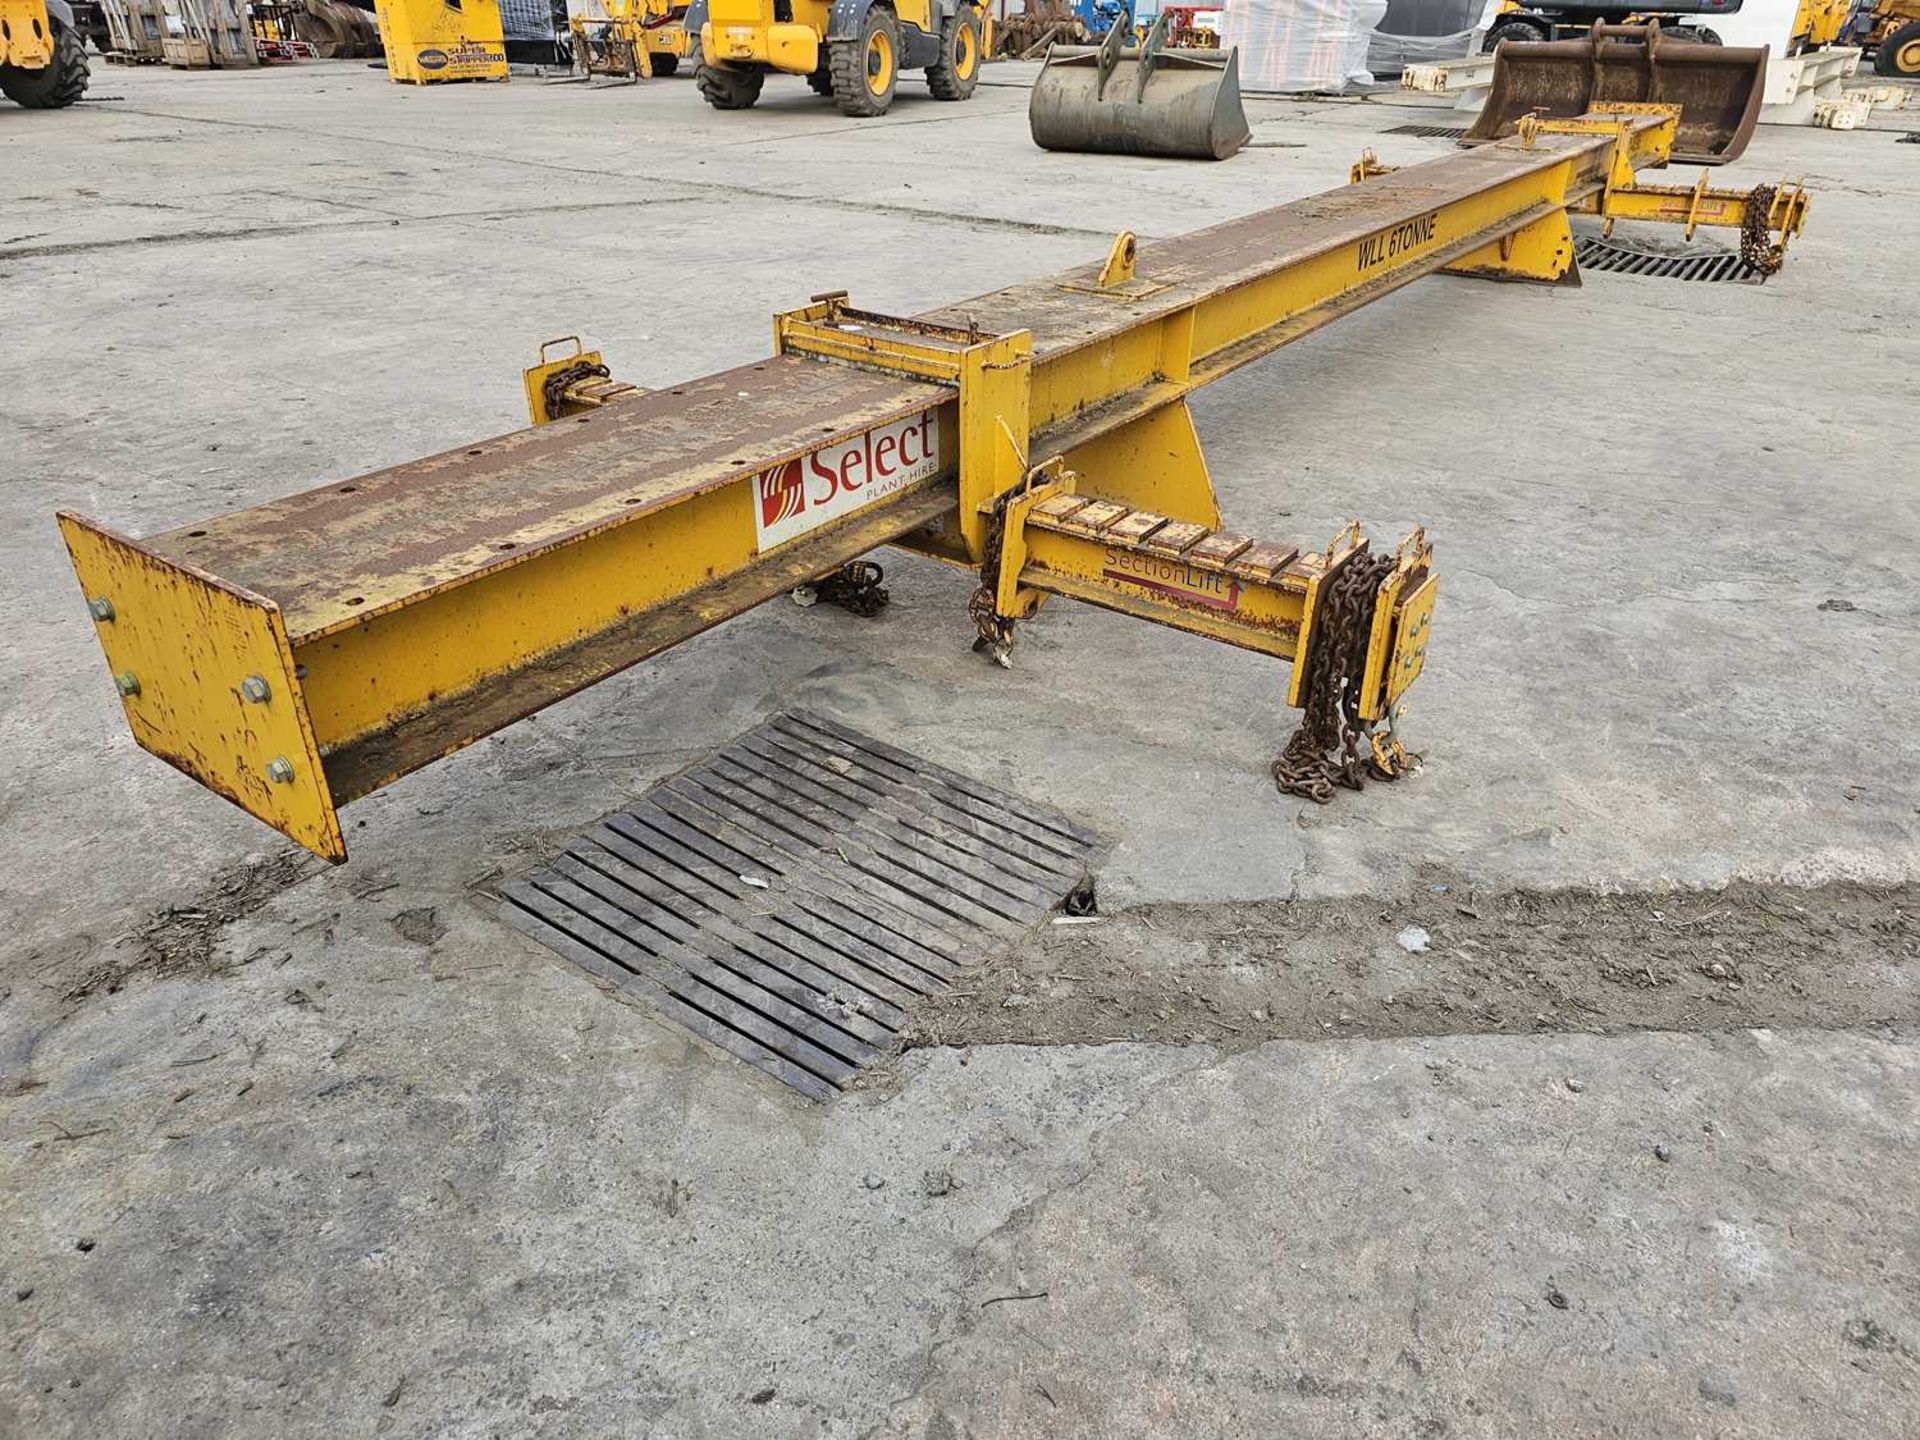 2018 Section Lift 9.7m x 2.5m Adjustable 6 Ton Spreader Beam - Image 4 of 7